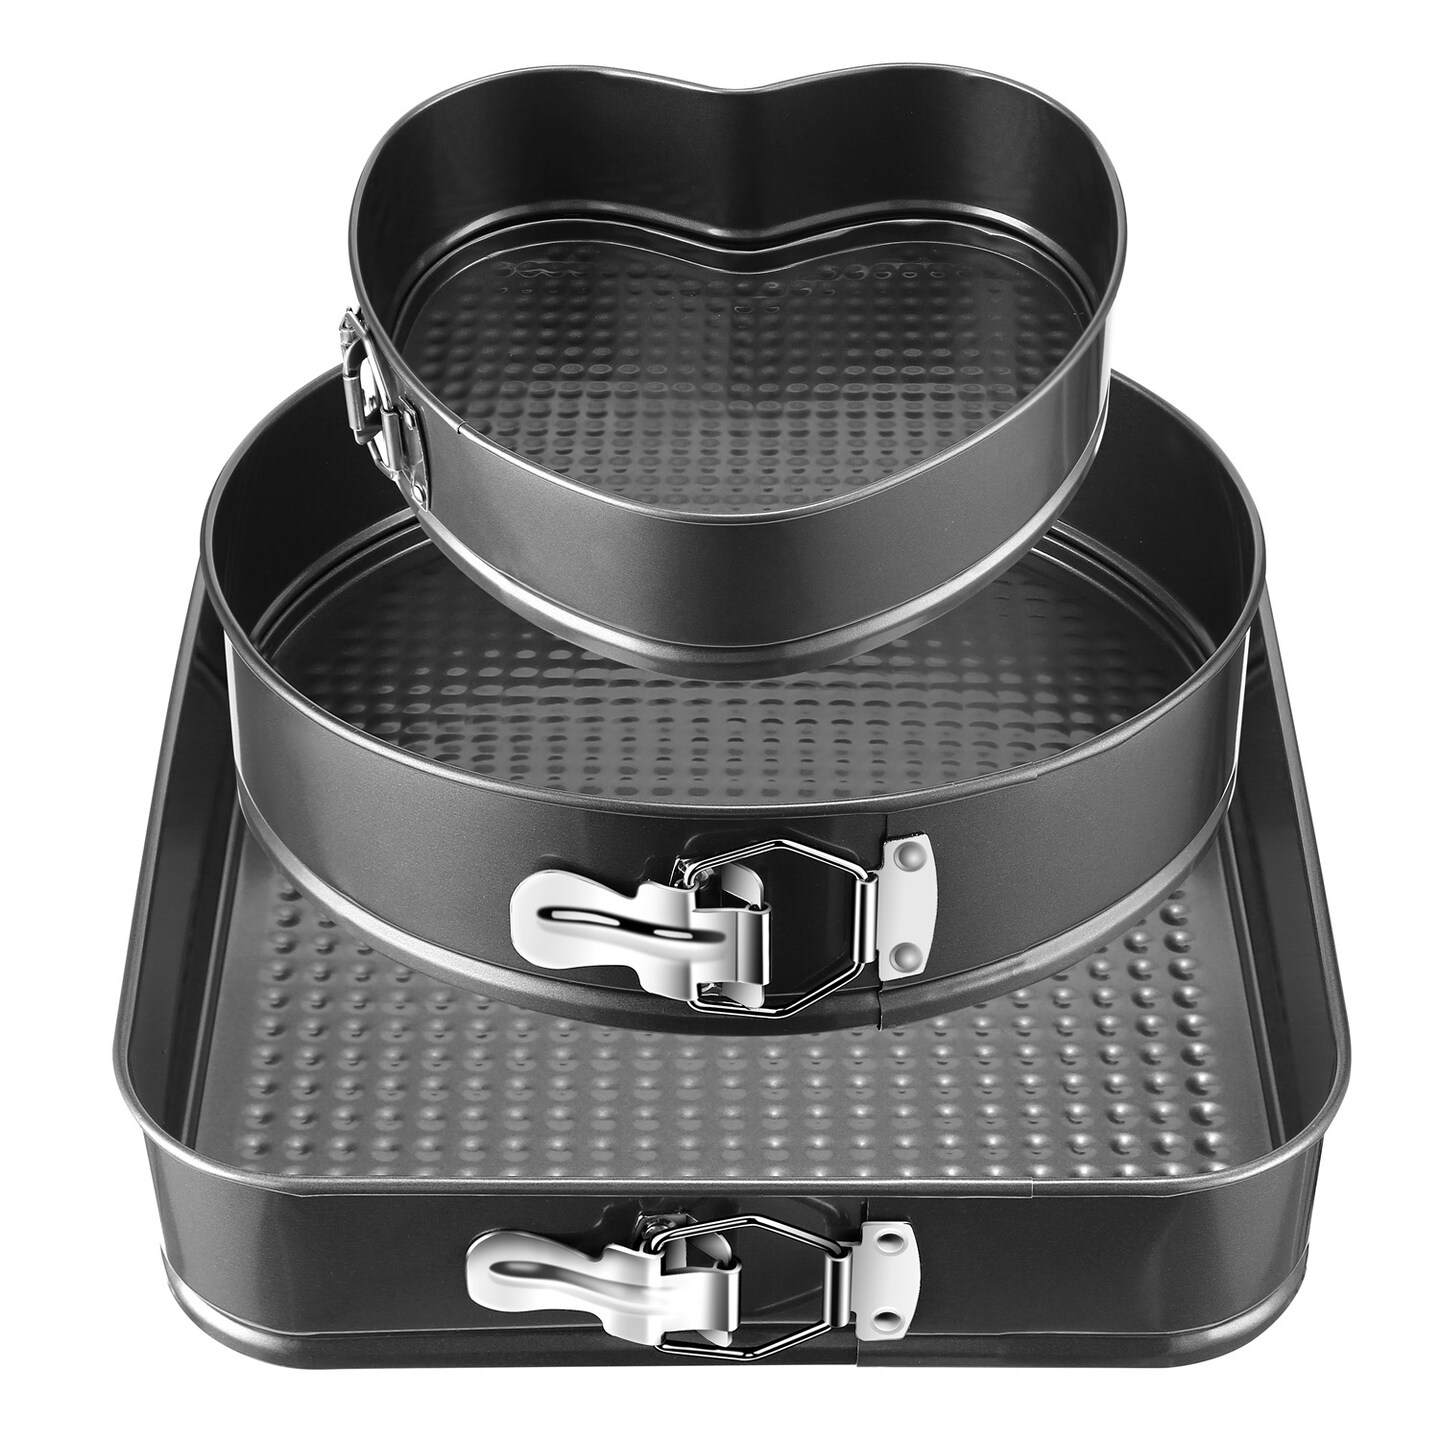 Eggracks by Global Phoenix Non Stick Spring form Bakeware 3Pcs Pan Set with Removable Bottom